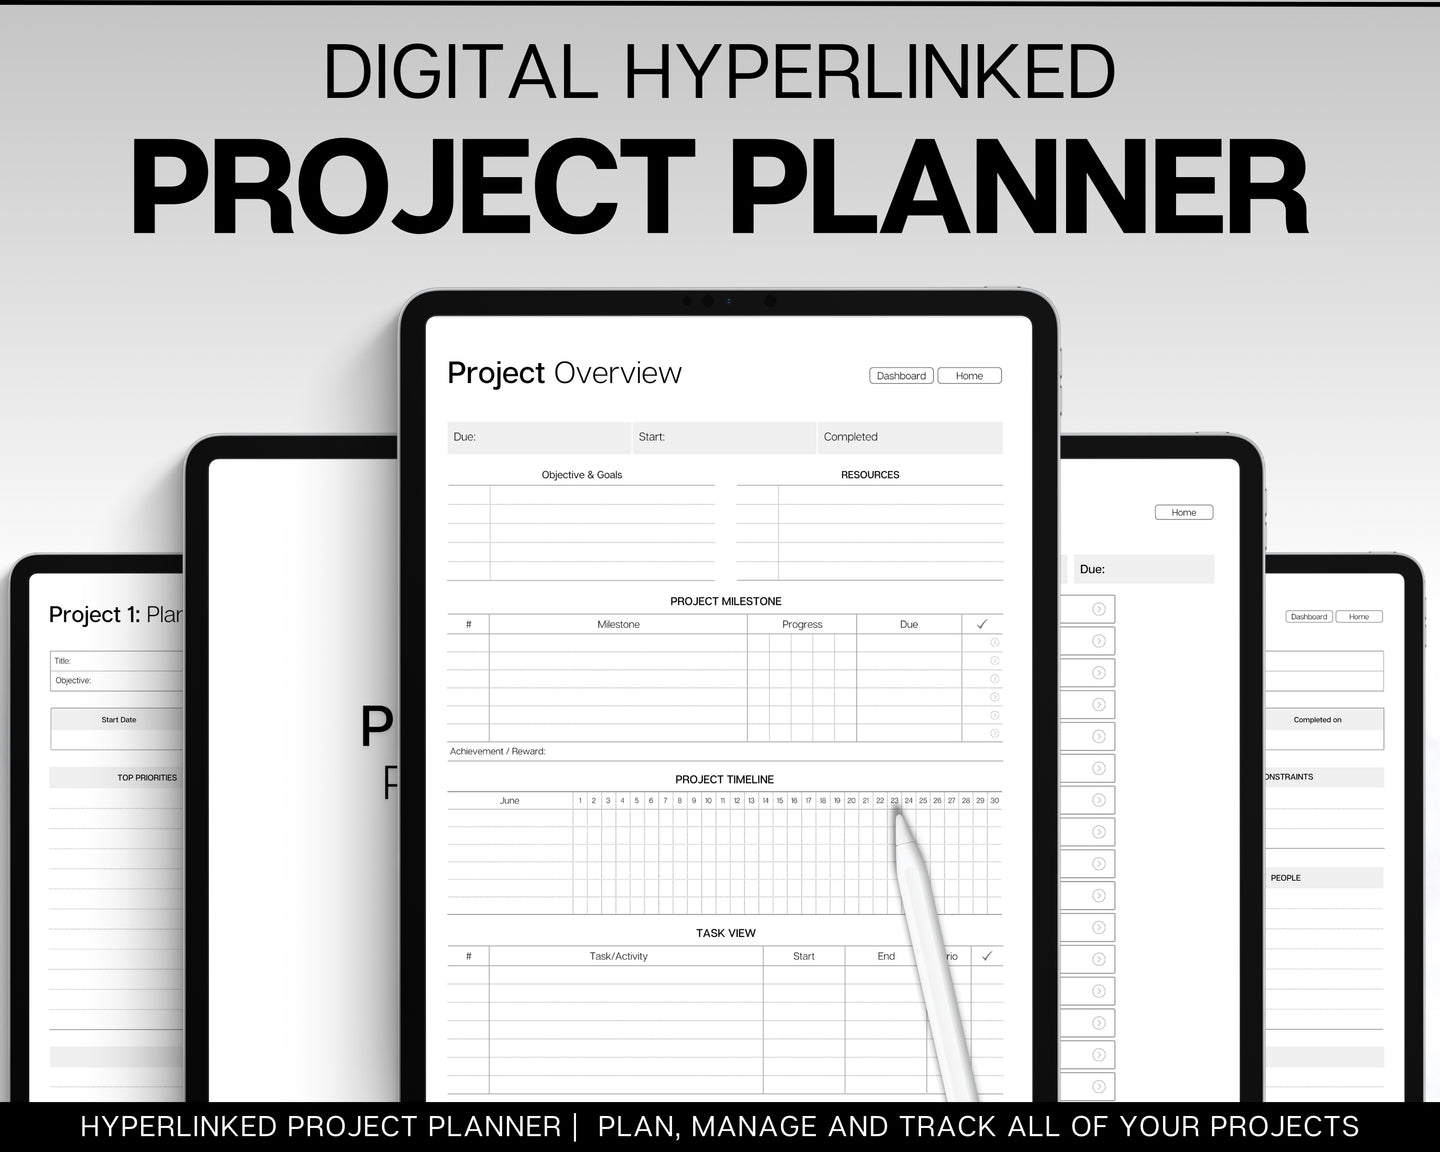 Digital Project Planner | Digital Project Tracker Management Tool Includes Gannt Charts